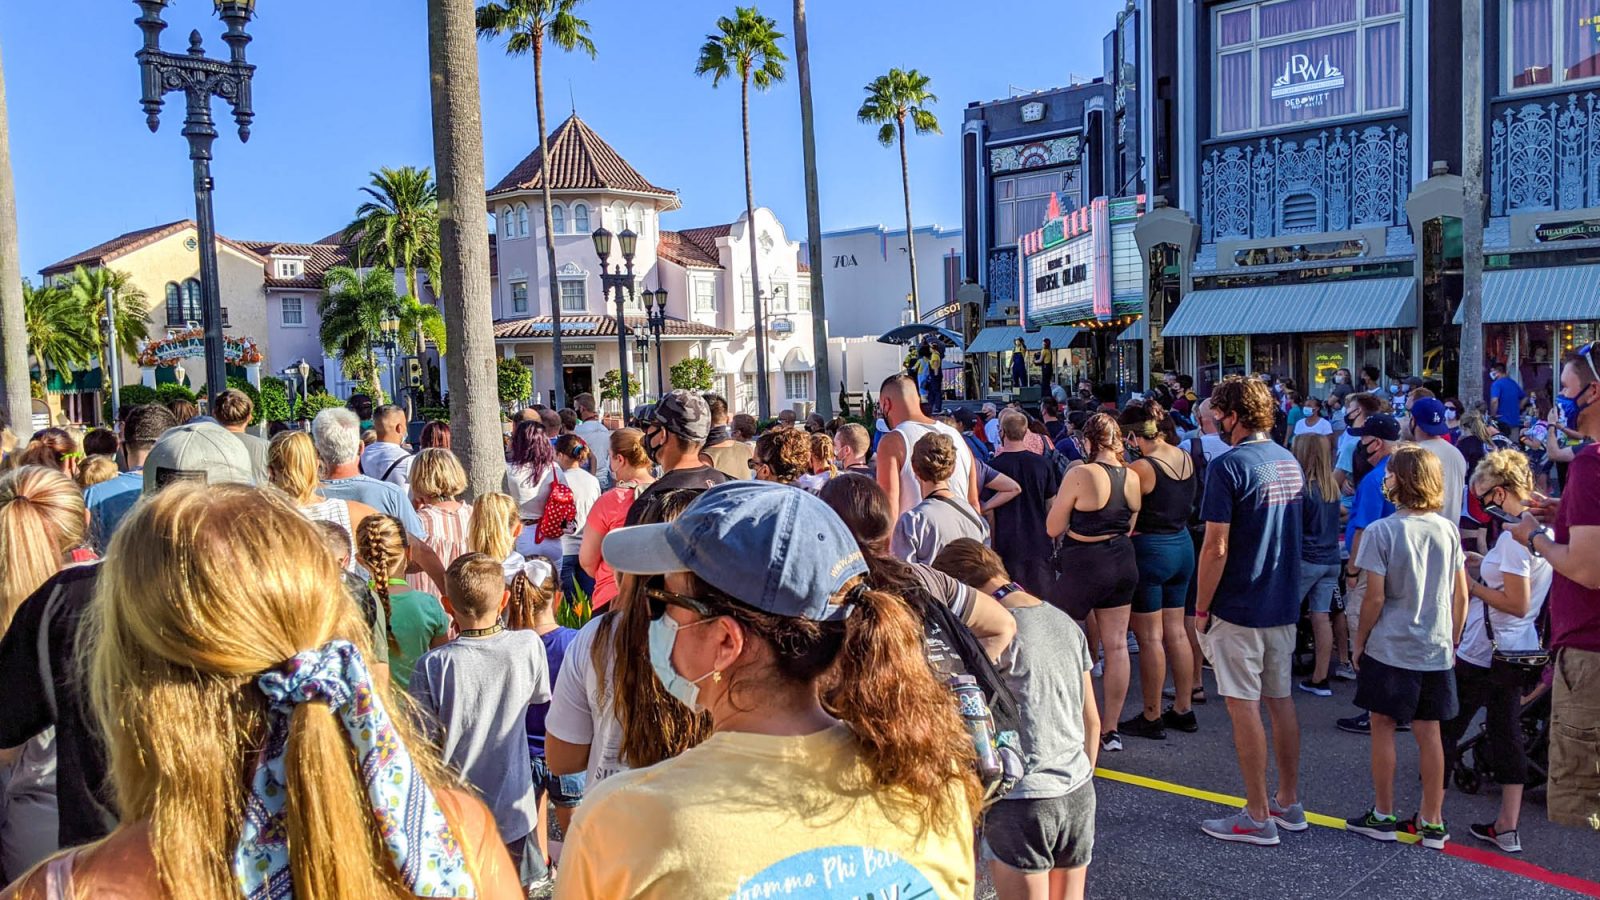 Should You Visit Universal Orlando During the Pandemic? Ehh, Maybe Not | Universal Studios, Orlando, Florida - Islands of Adventure, Wizarding World of Harry Potter